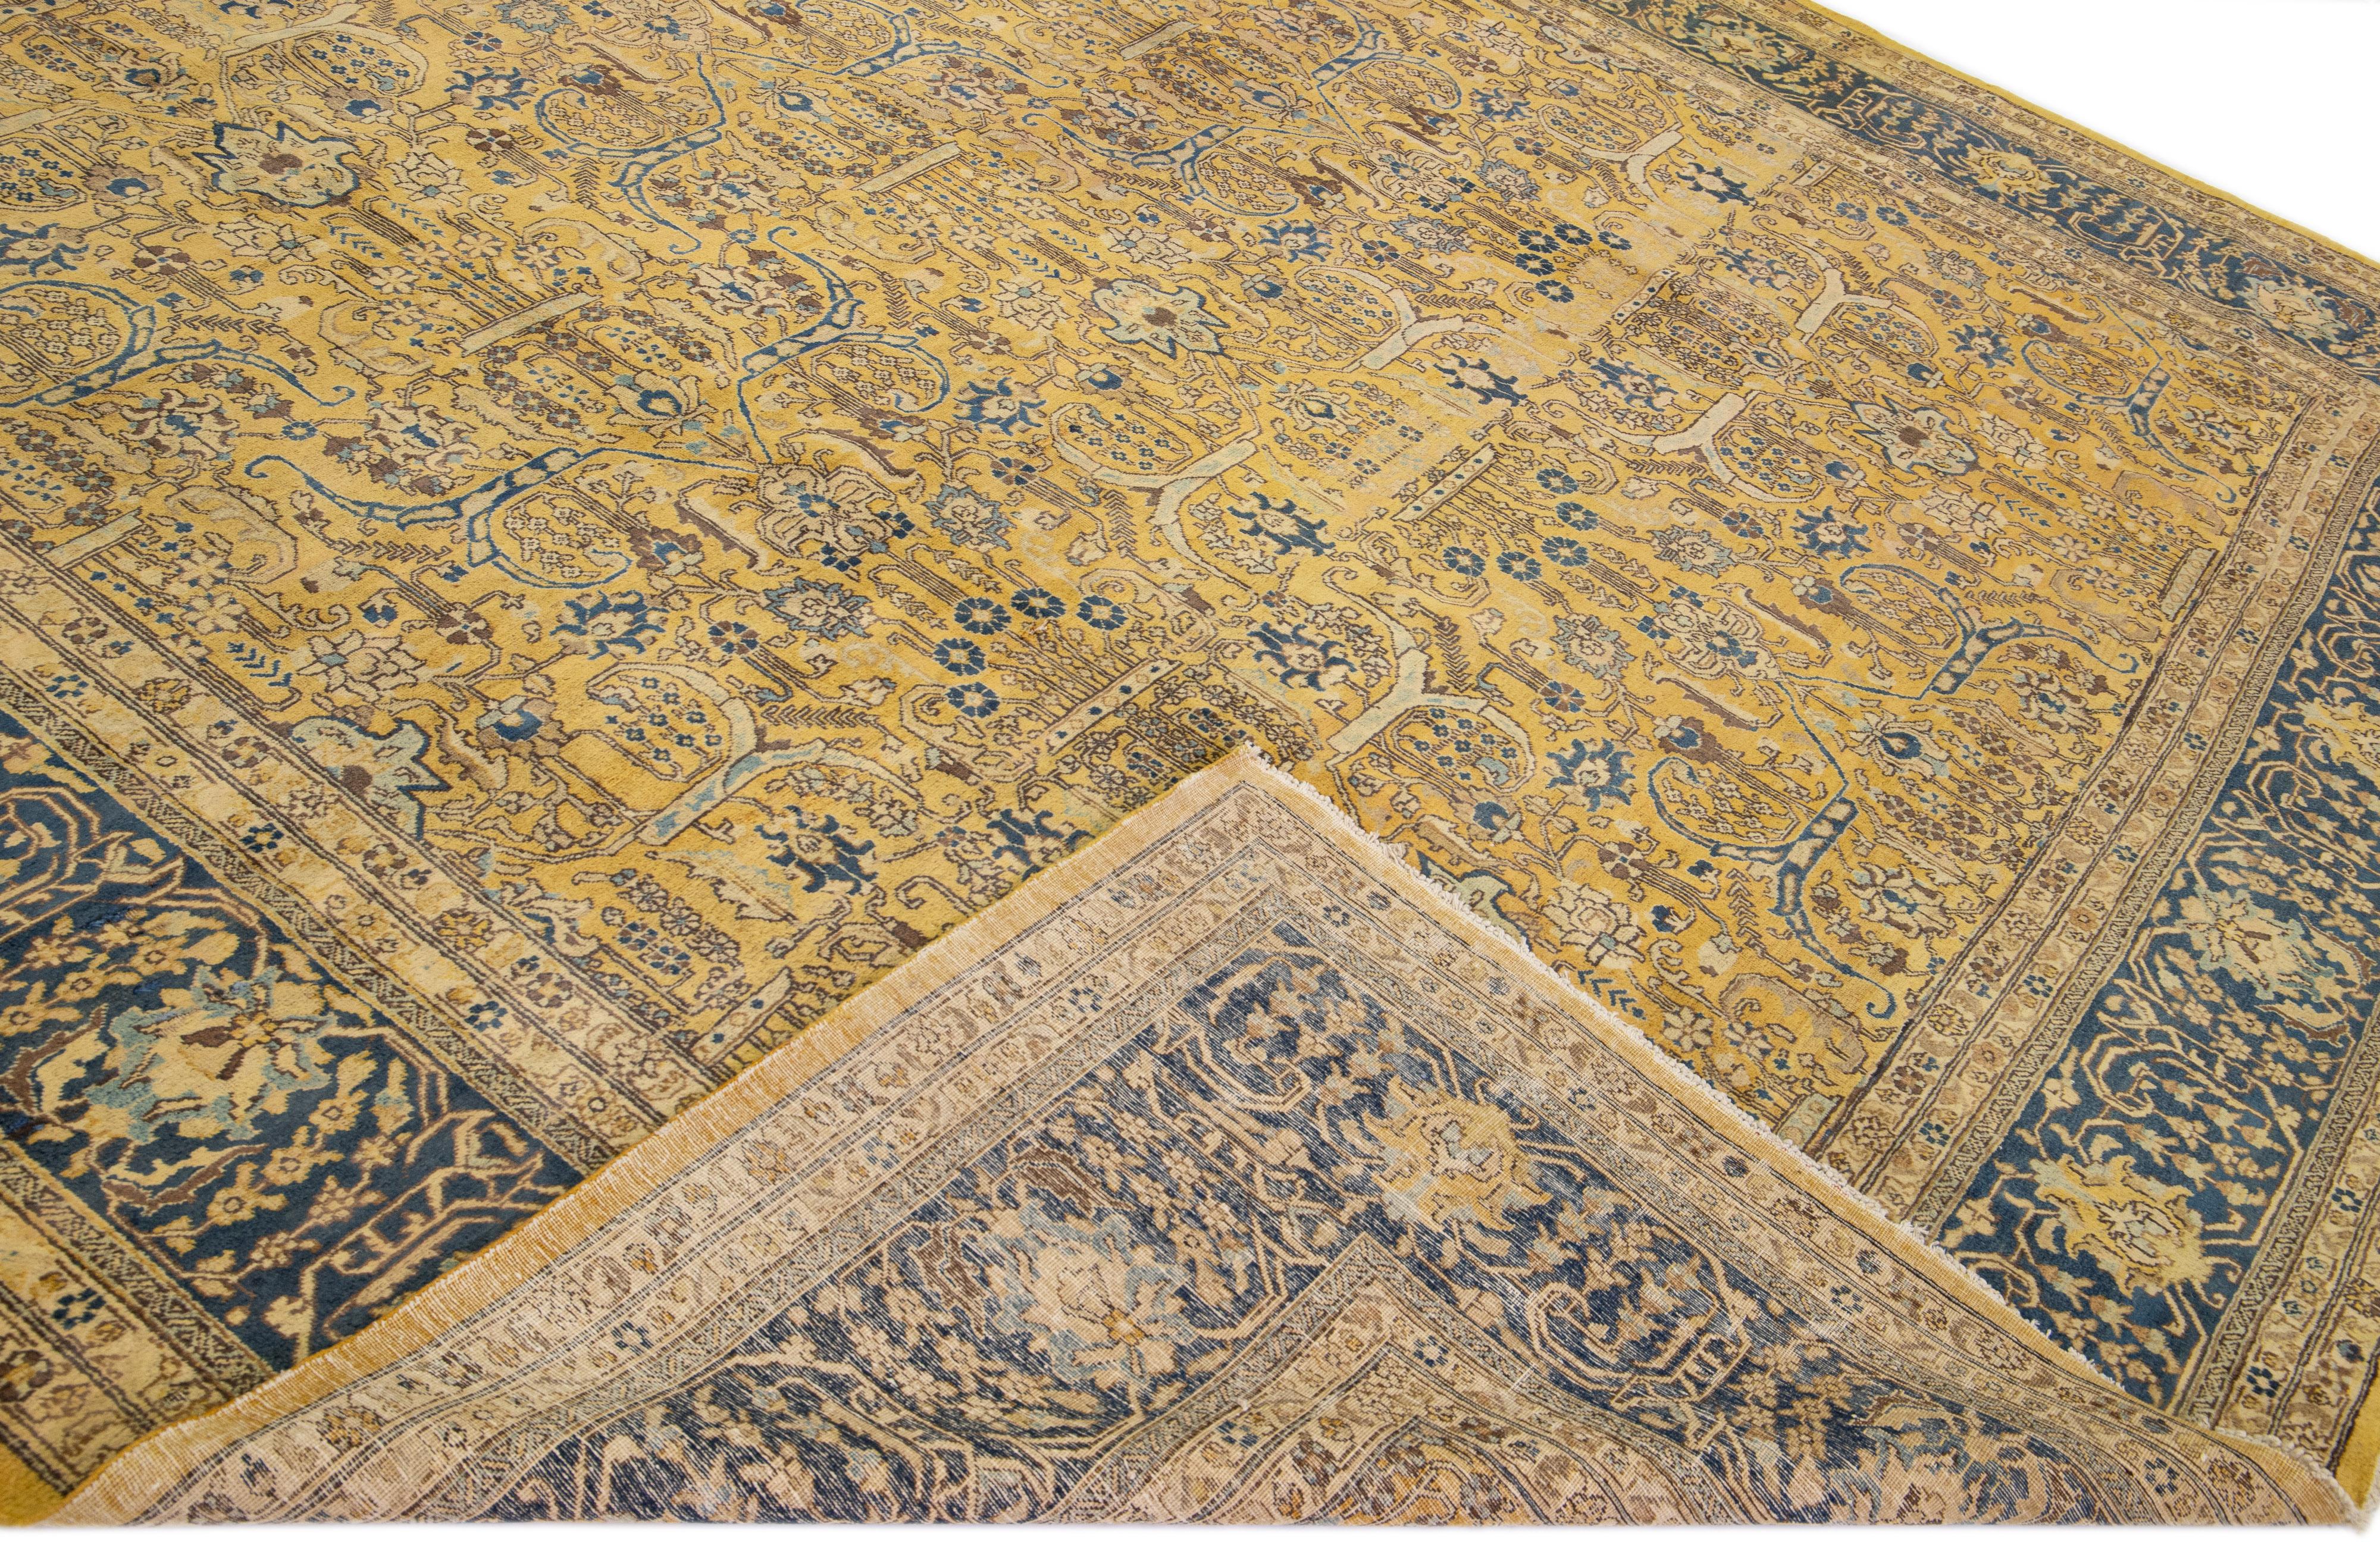 Beautiful antique Tabriz hand-knotted wool rug with a yellow field. This Persian piece has a blue frame and brown accents in a traditional floral design. 

This rug measures: 12' x 16'10